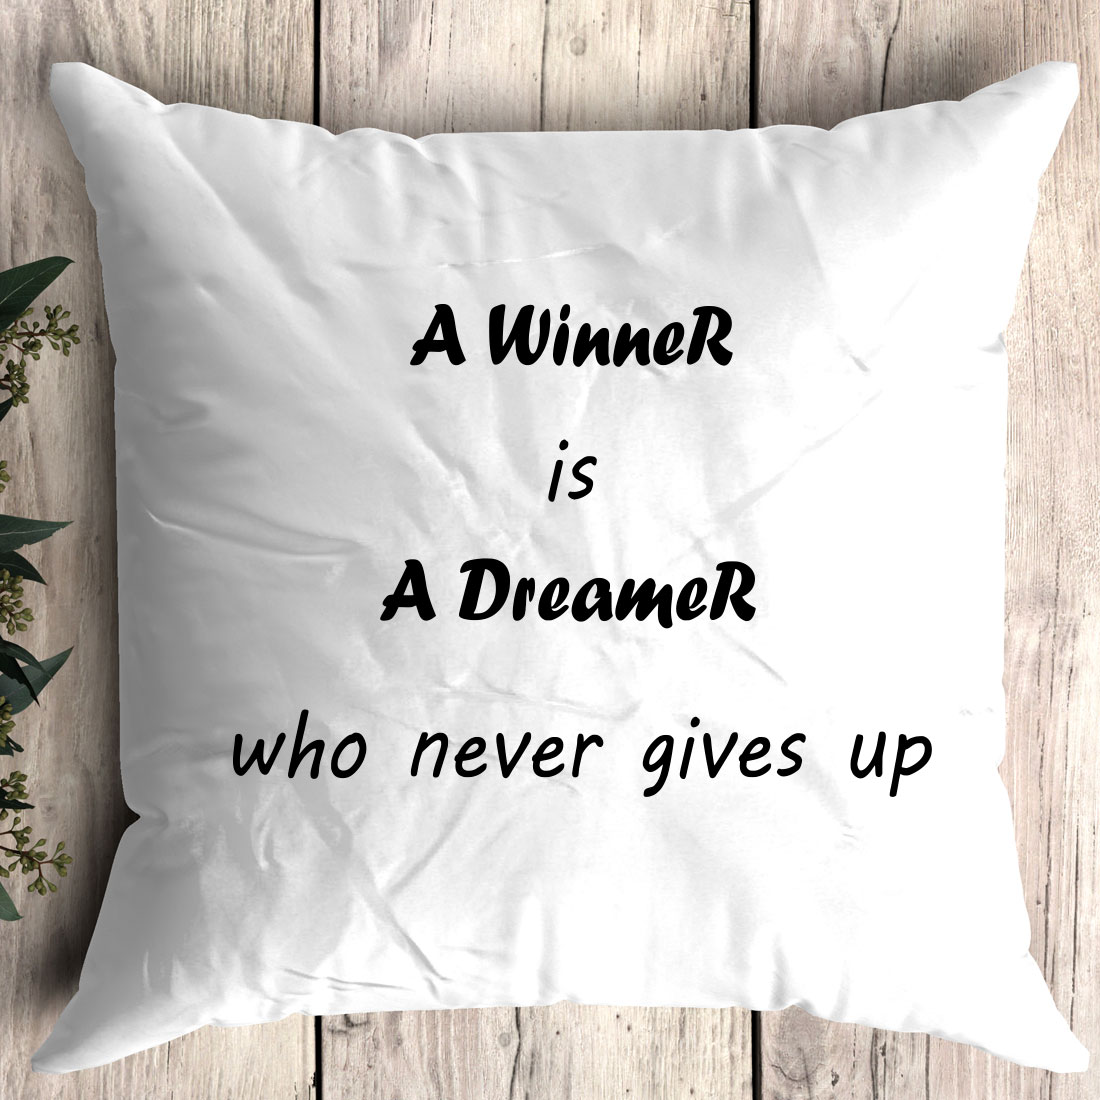 Pillow that says a winner is a dramar who never gives up.